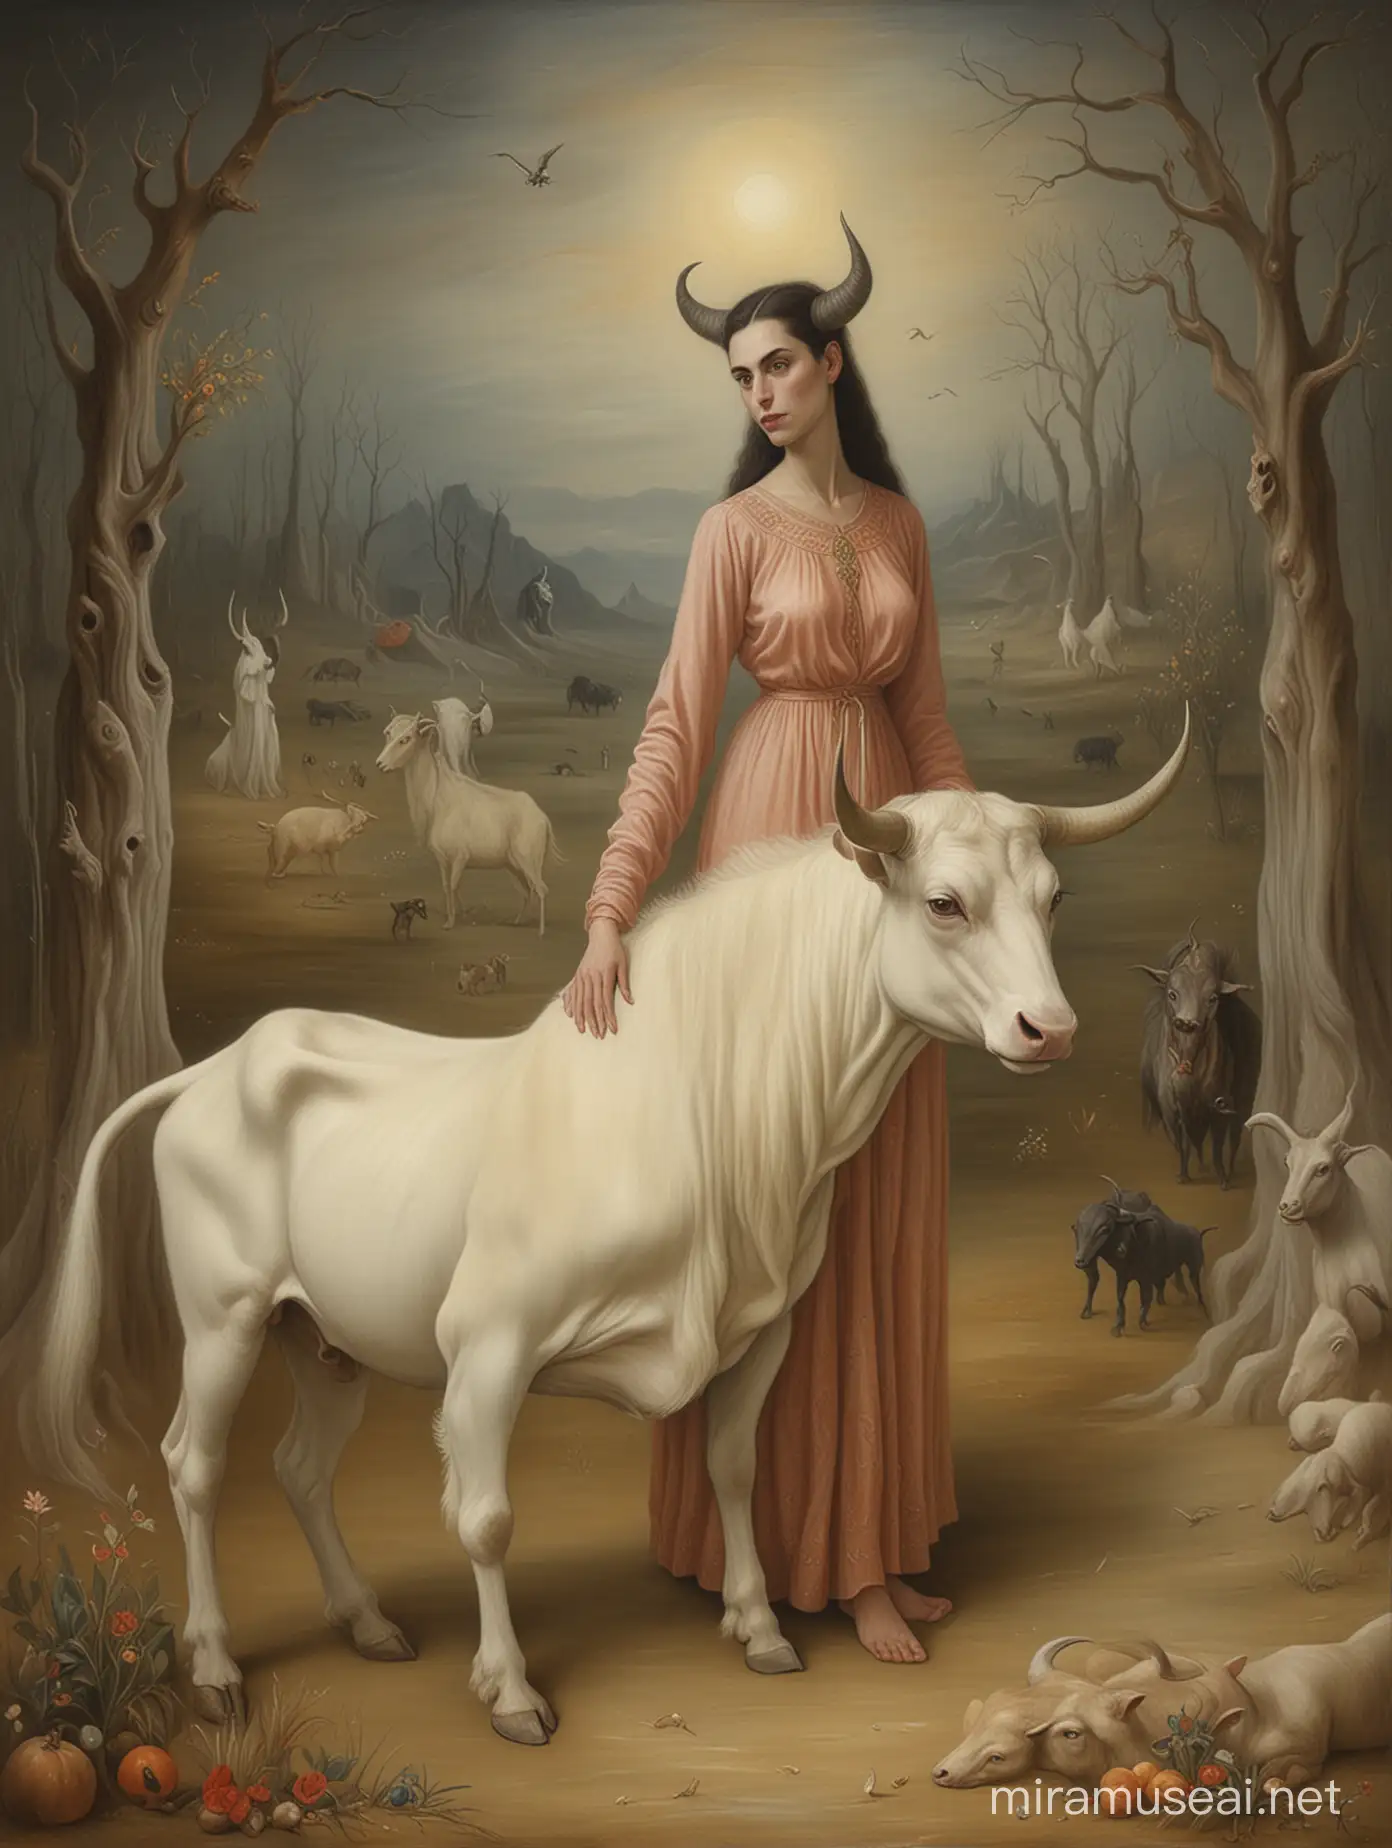 Highly detailed painting based on ((('And Then We Saw the Daughter of the Minotaur' by Leonora Carrington, 1953))), a female figure and a white bull in a desert landscape, use muted pastel colors only, high quality